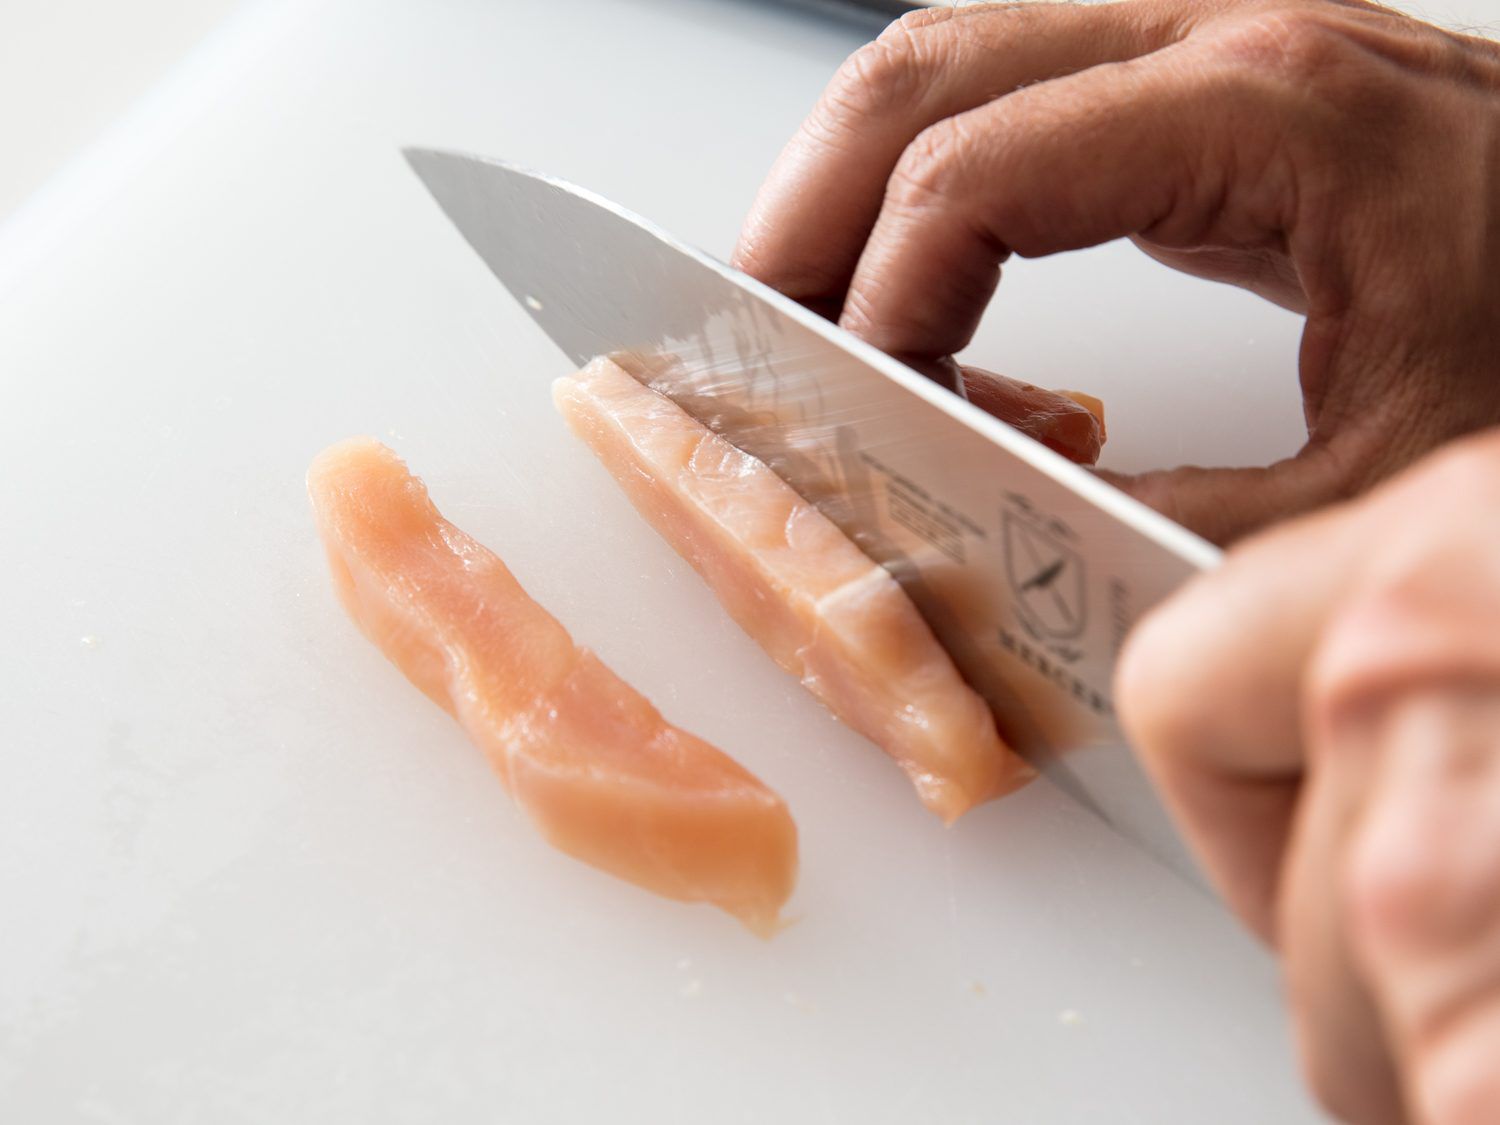 A knife slicing against the muscle grain of a chicken breast to create larger slices, which in turn will be diced into cubes, for stir-frying.